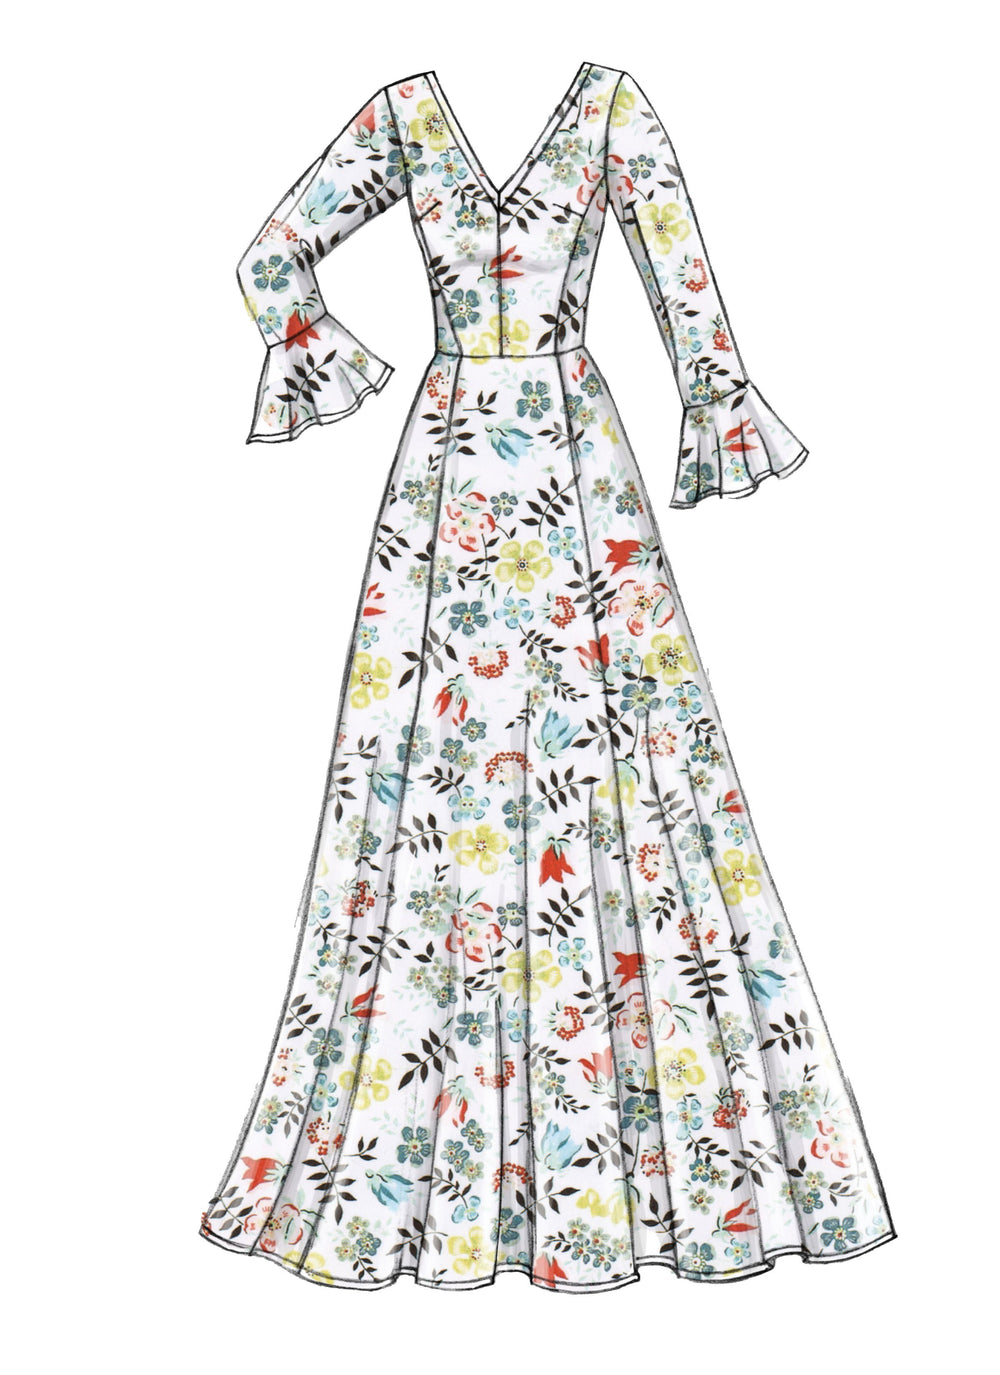 Vogue Pattern 9328 Misses' Dress | Vogue Easy Options, Custom Fit from Jaycotts Sewing Supplies